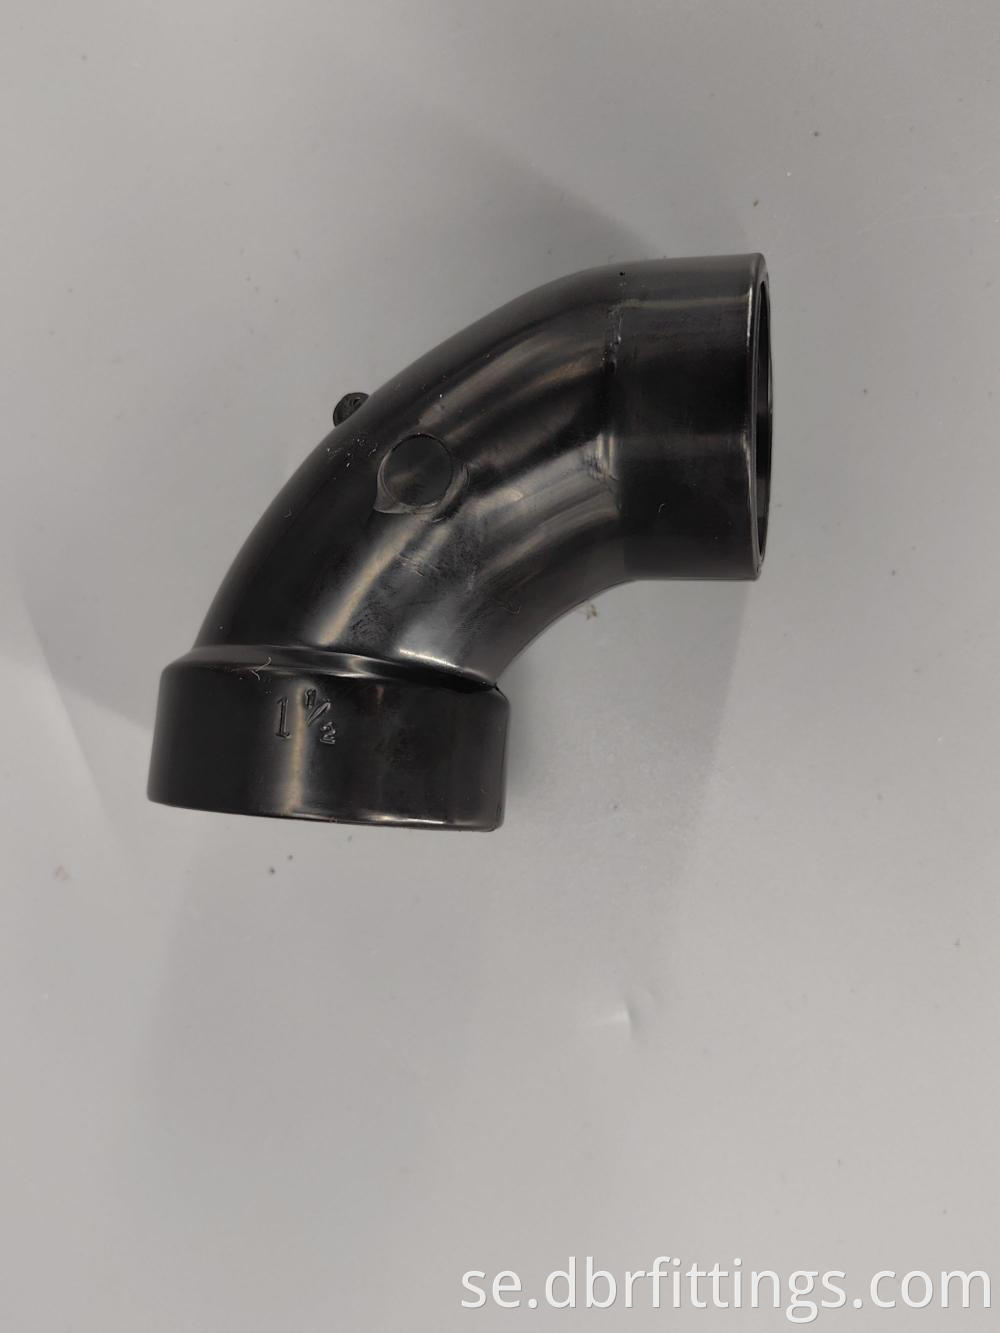 90°STREET ELBOW ABS fittings for bathroom renovation